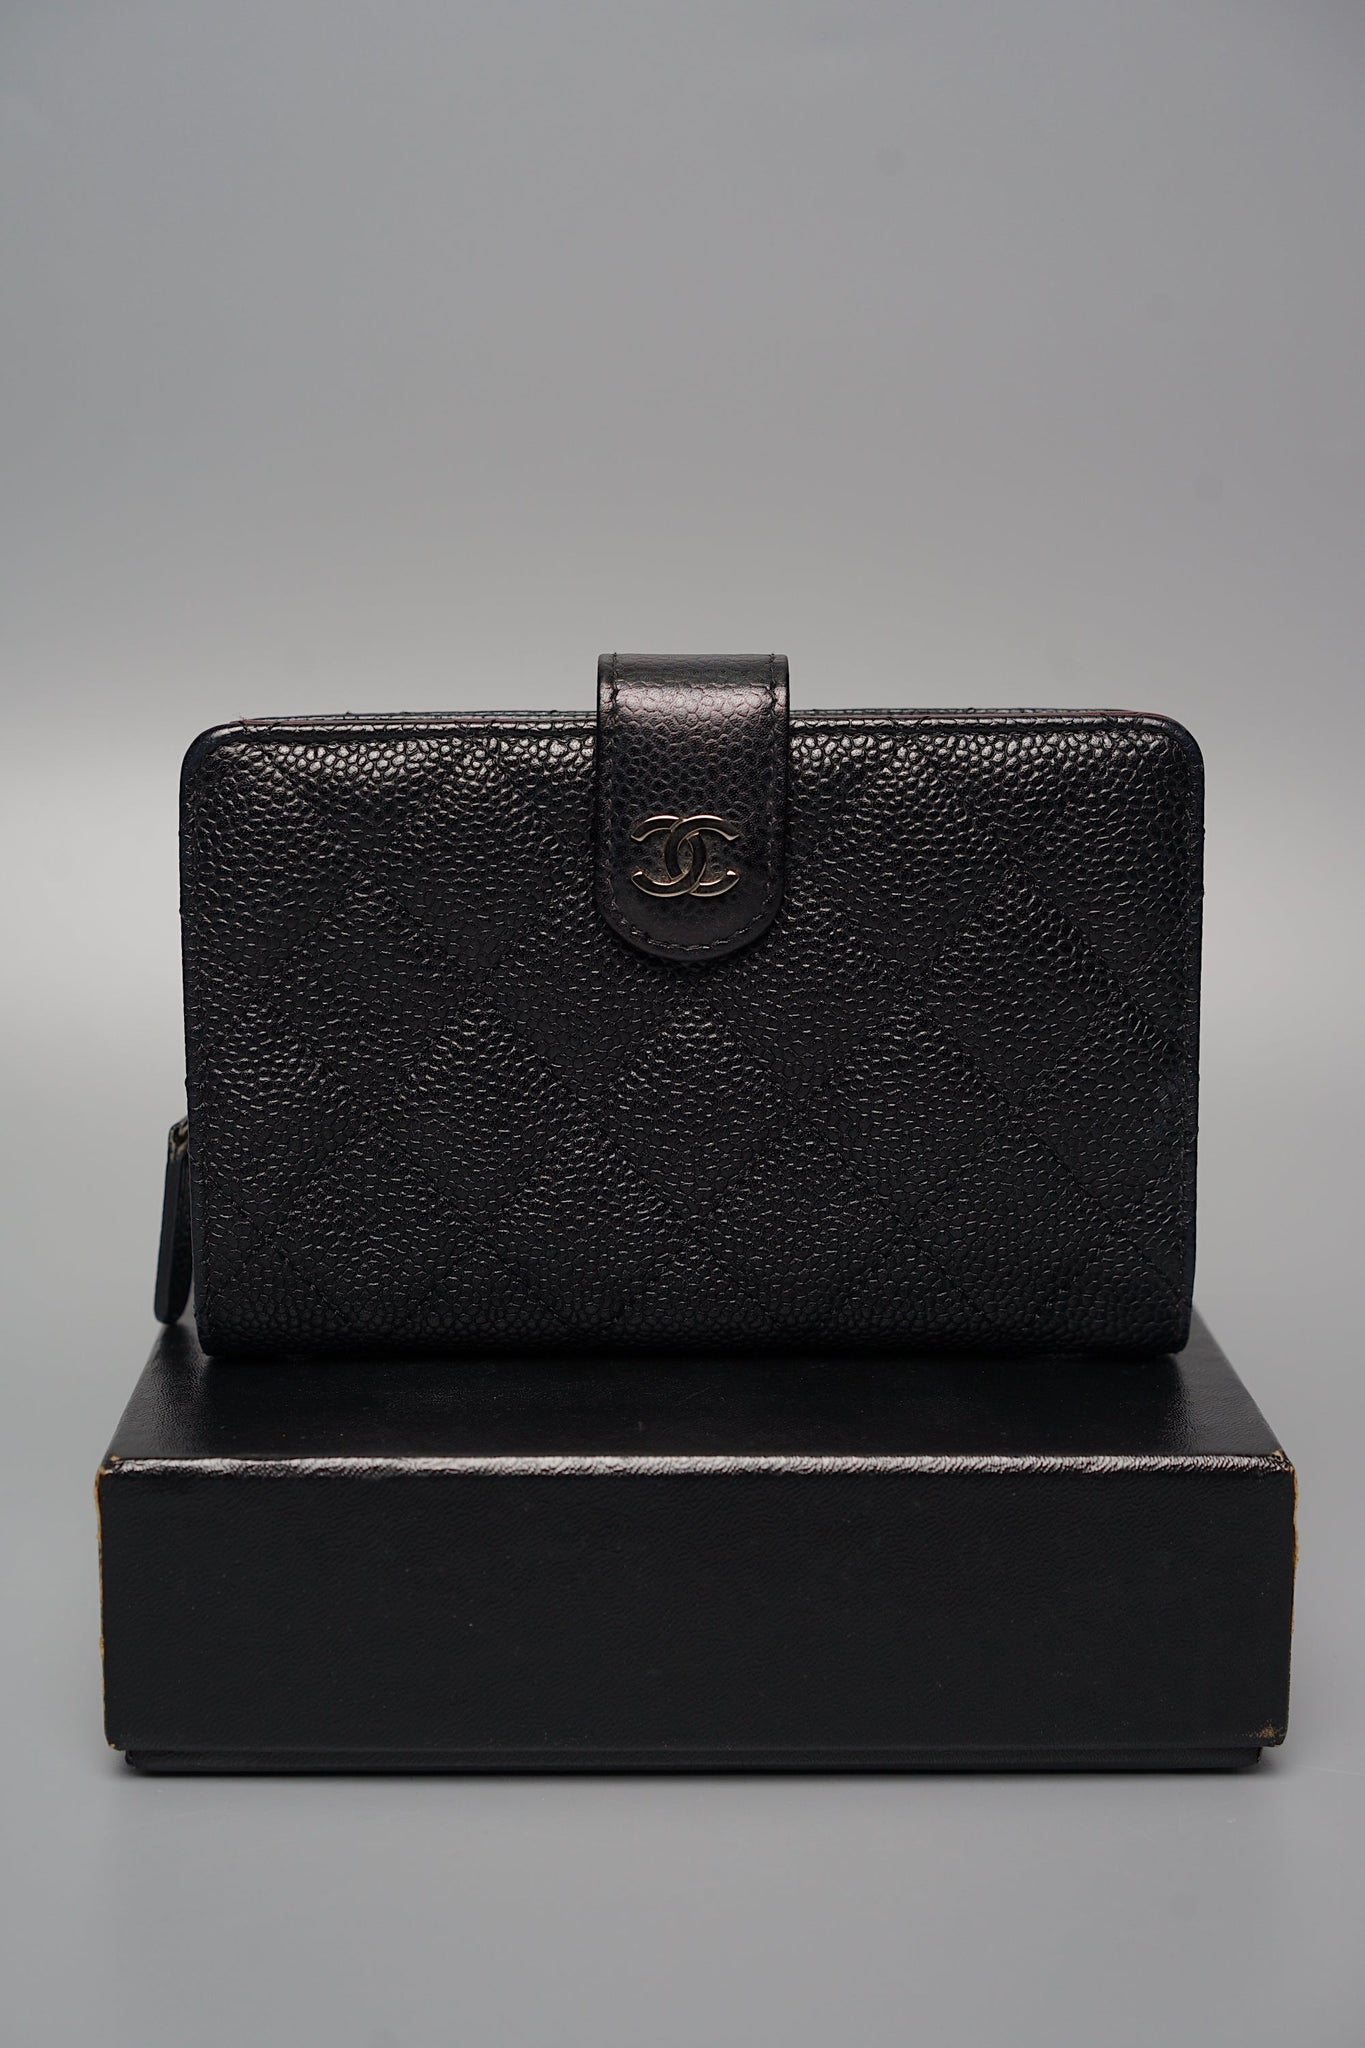 Chanel Timeless Compact Wallet in Black Caviar Shw